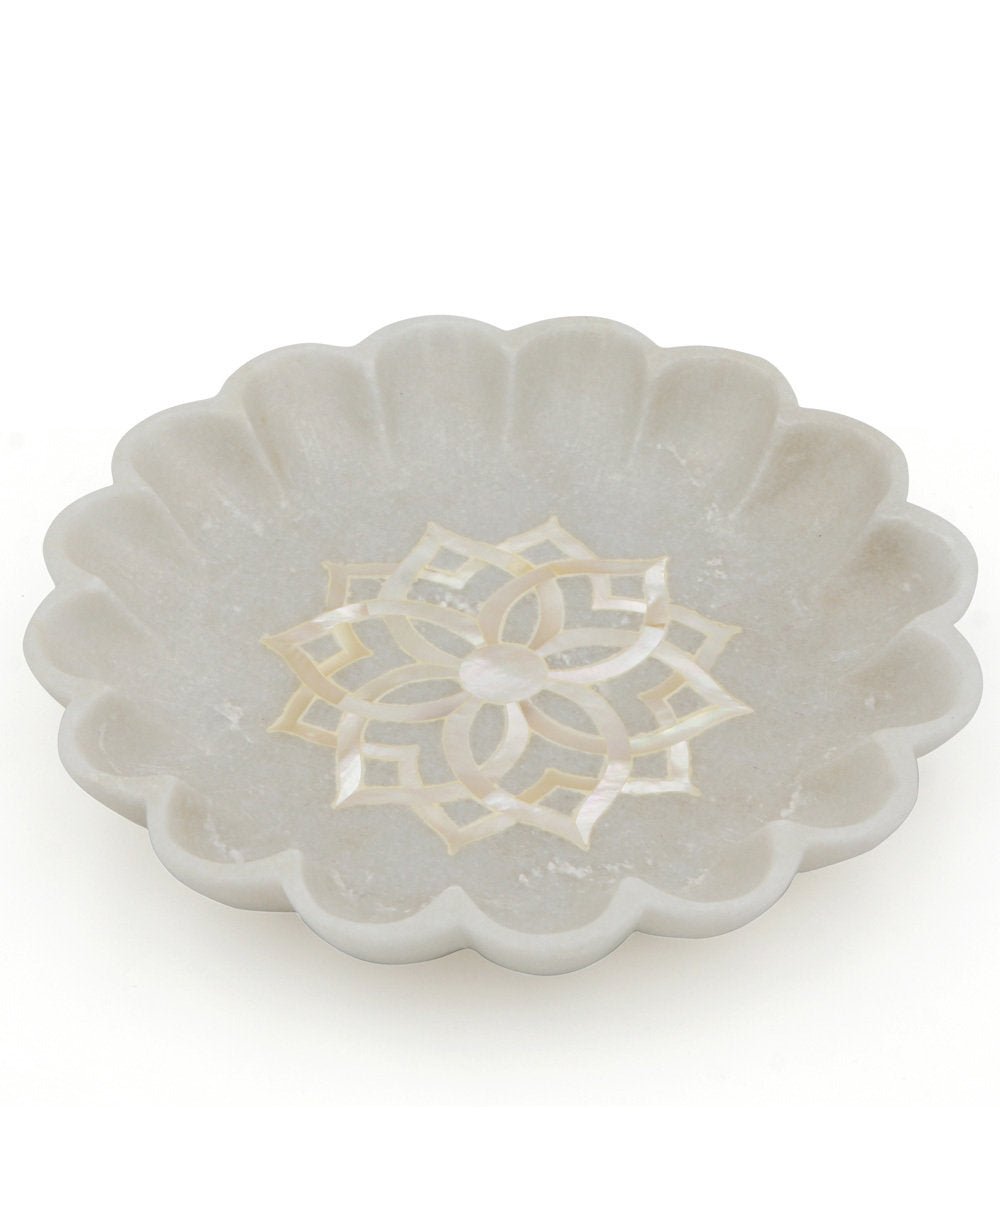 Marble and Mother of Pearl Decorative Lotus Bowl - Home